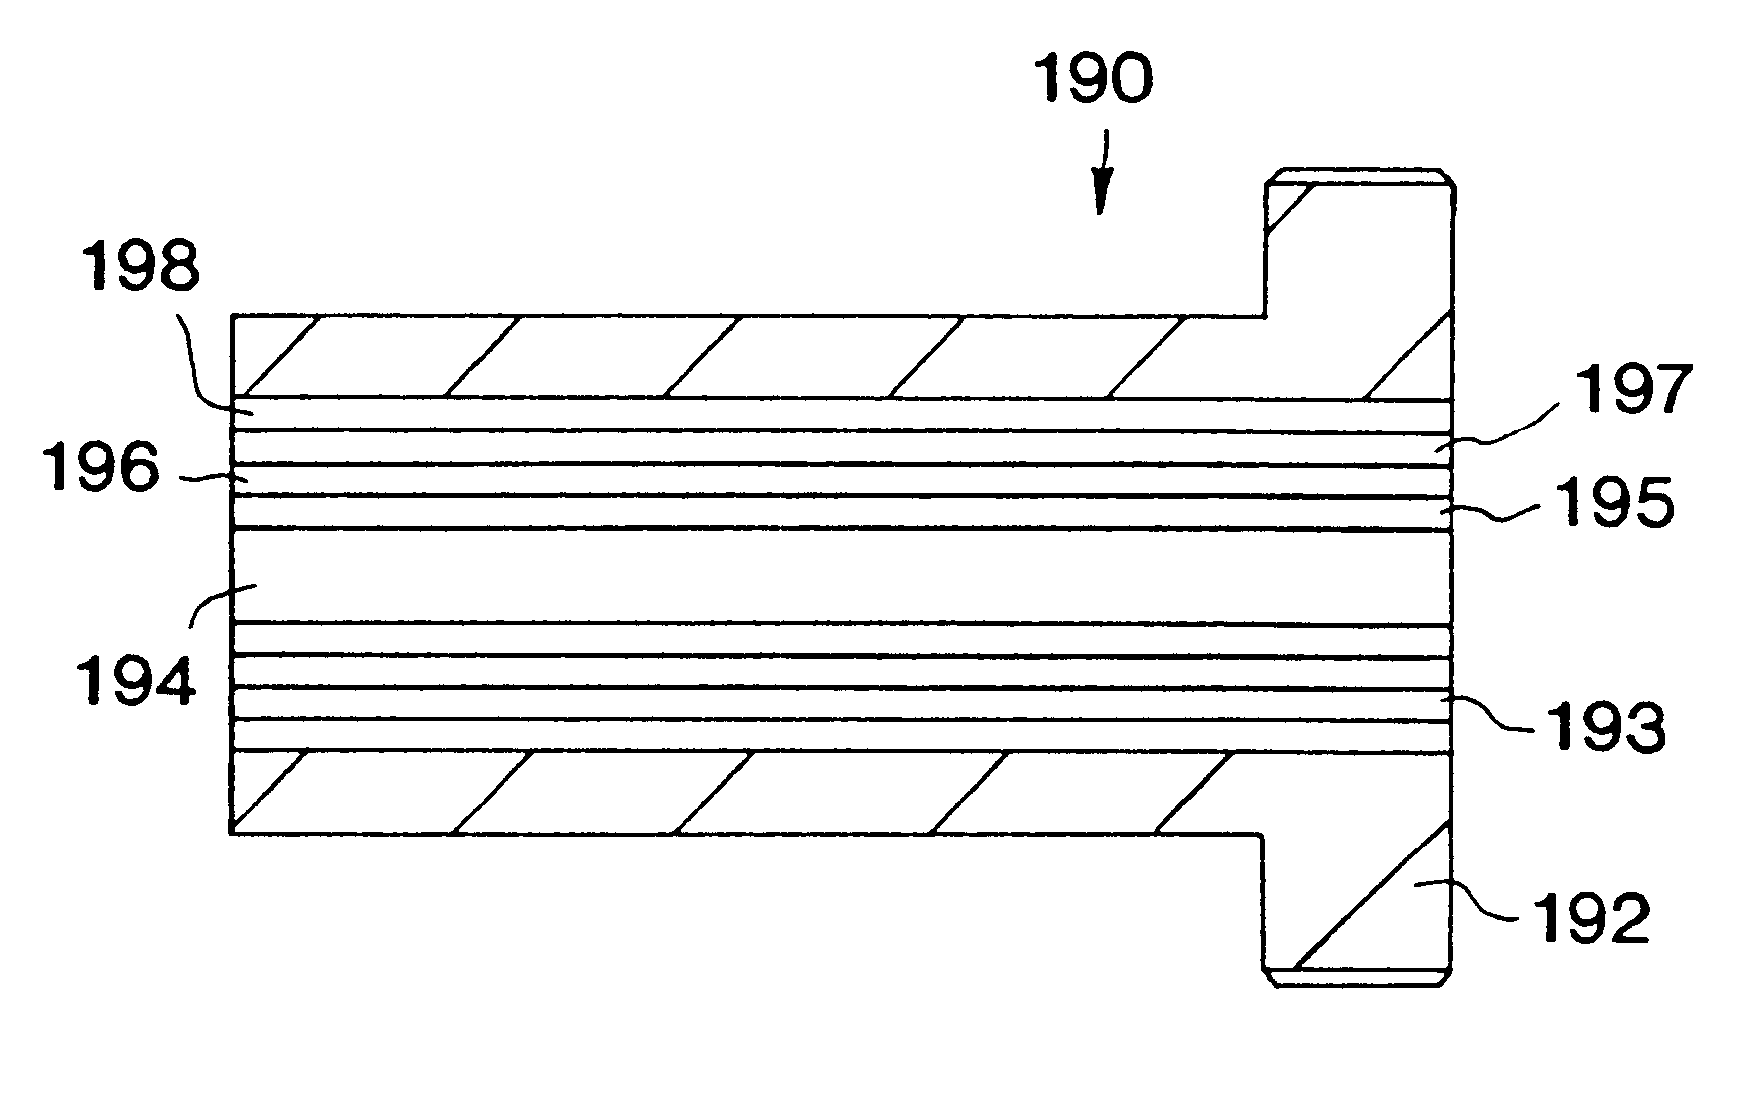 Molding system using film heaters and/or sensors